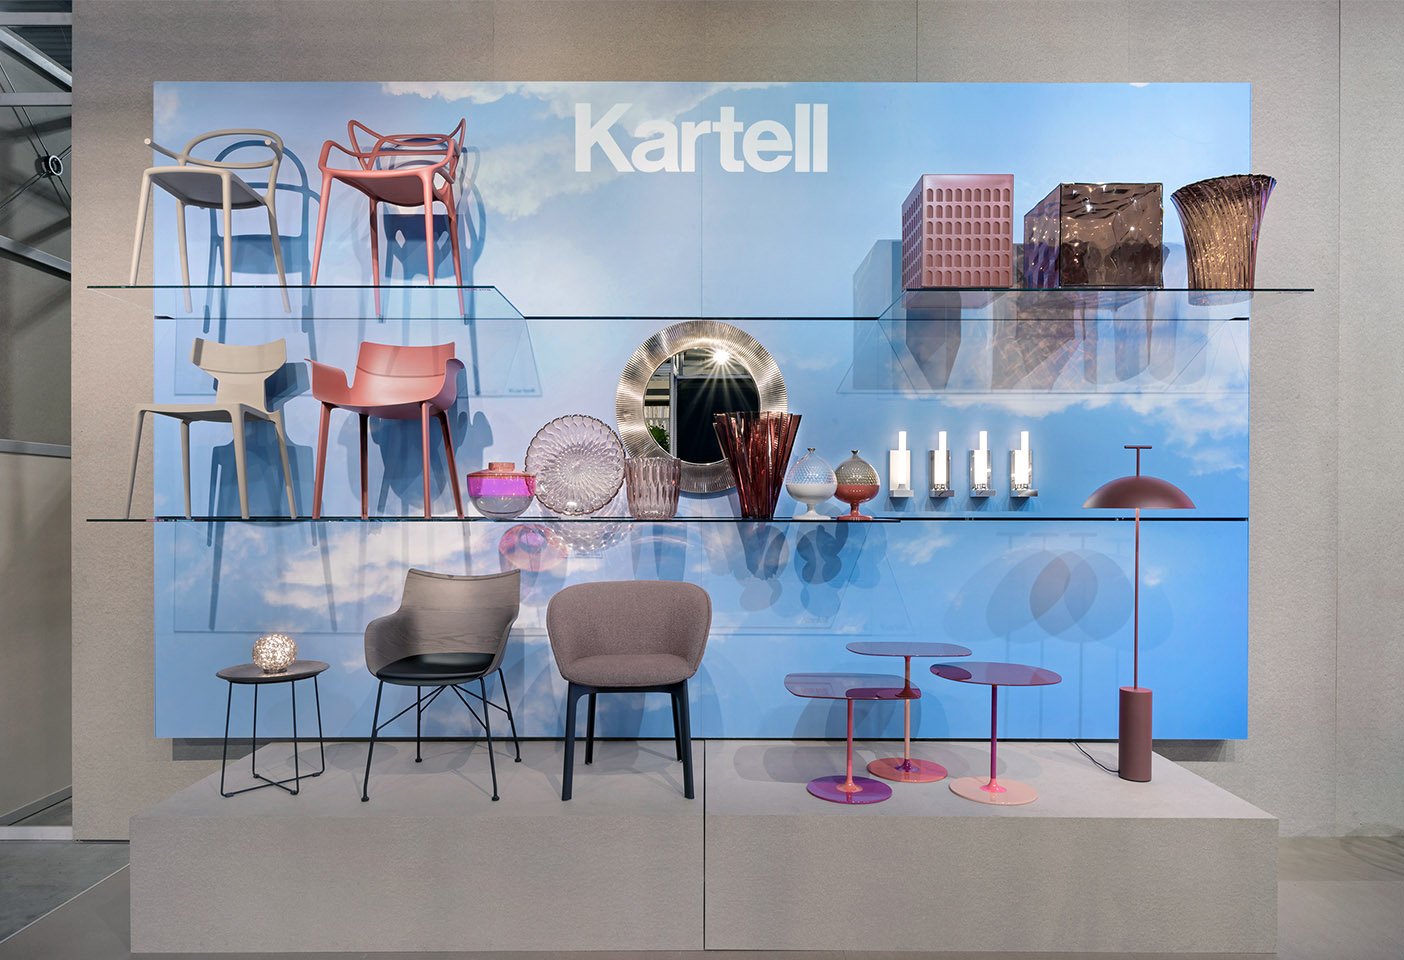 Kartell on show at 'Supersalone' in Rho, the main fairground and exhibition space curated by Stefano Boeri. Photo c/o Kartell. 